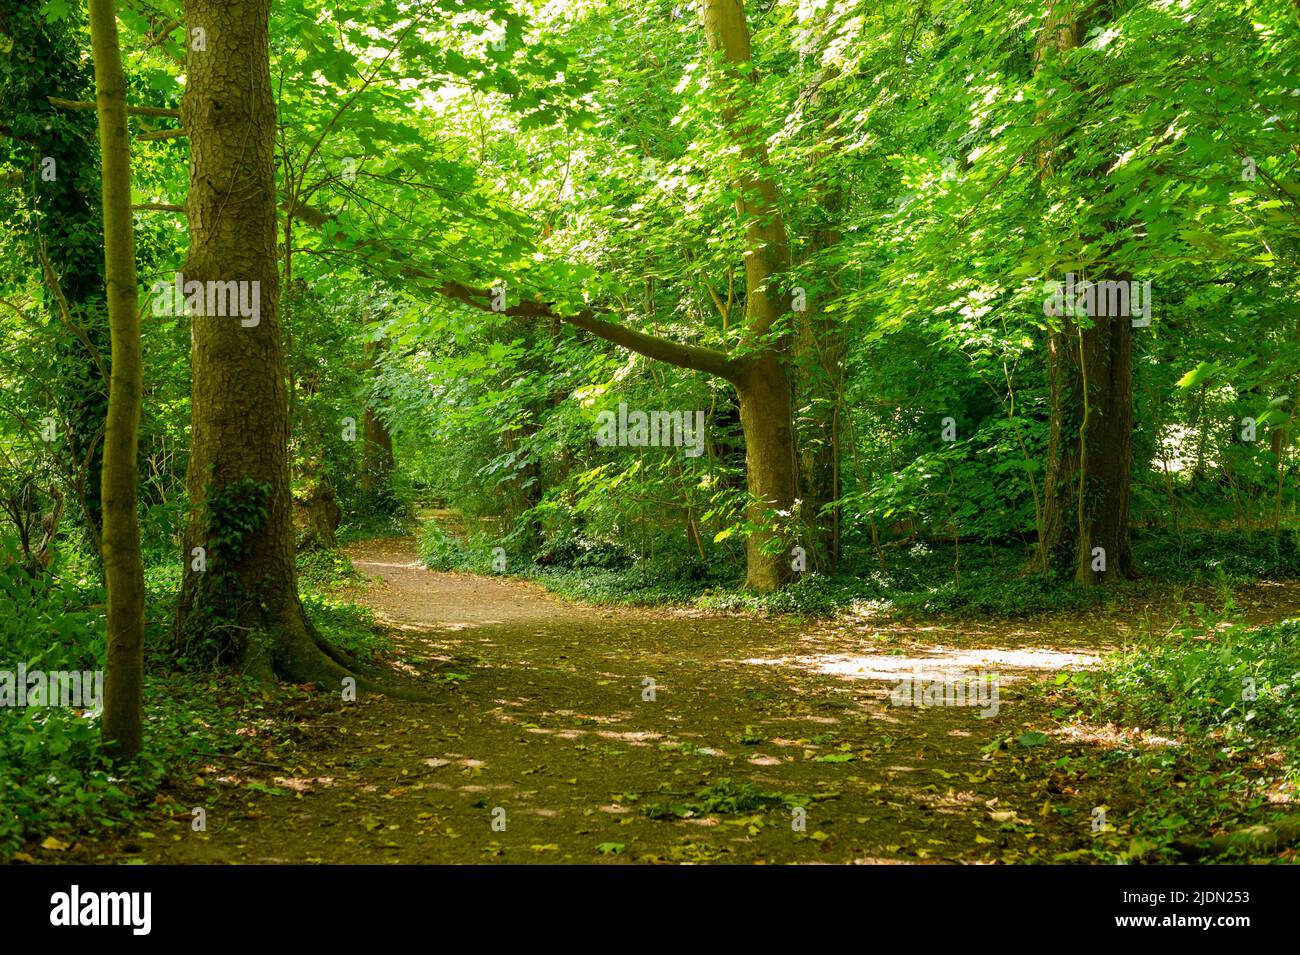 The English Countryside at Chalfont St Giles, Buckinghamshire, England Stock Photo